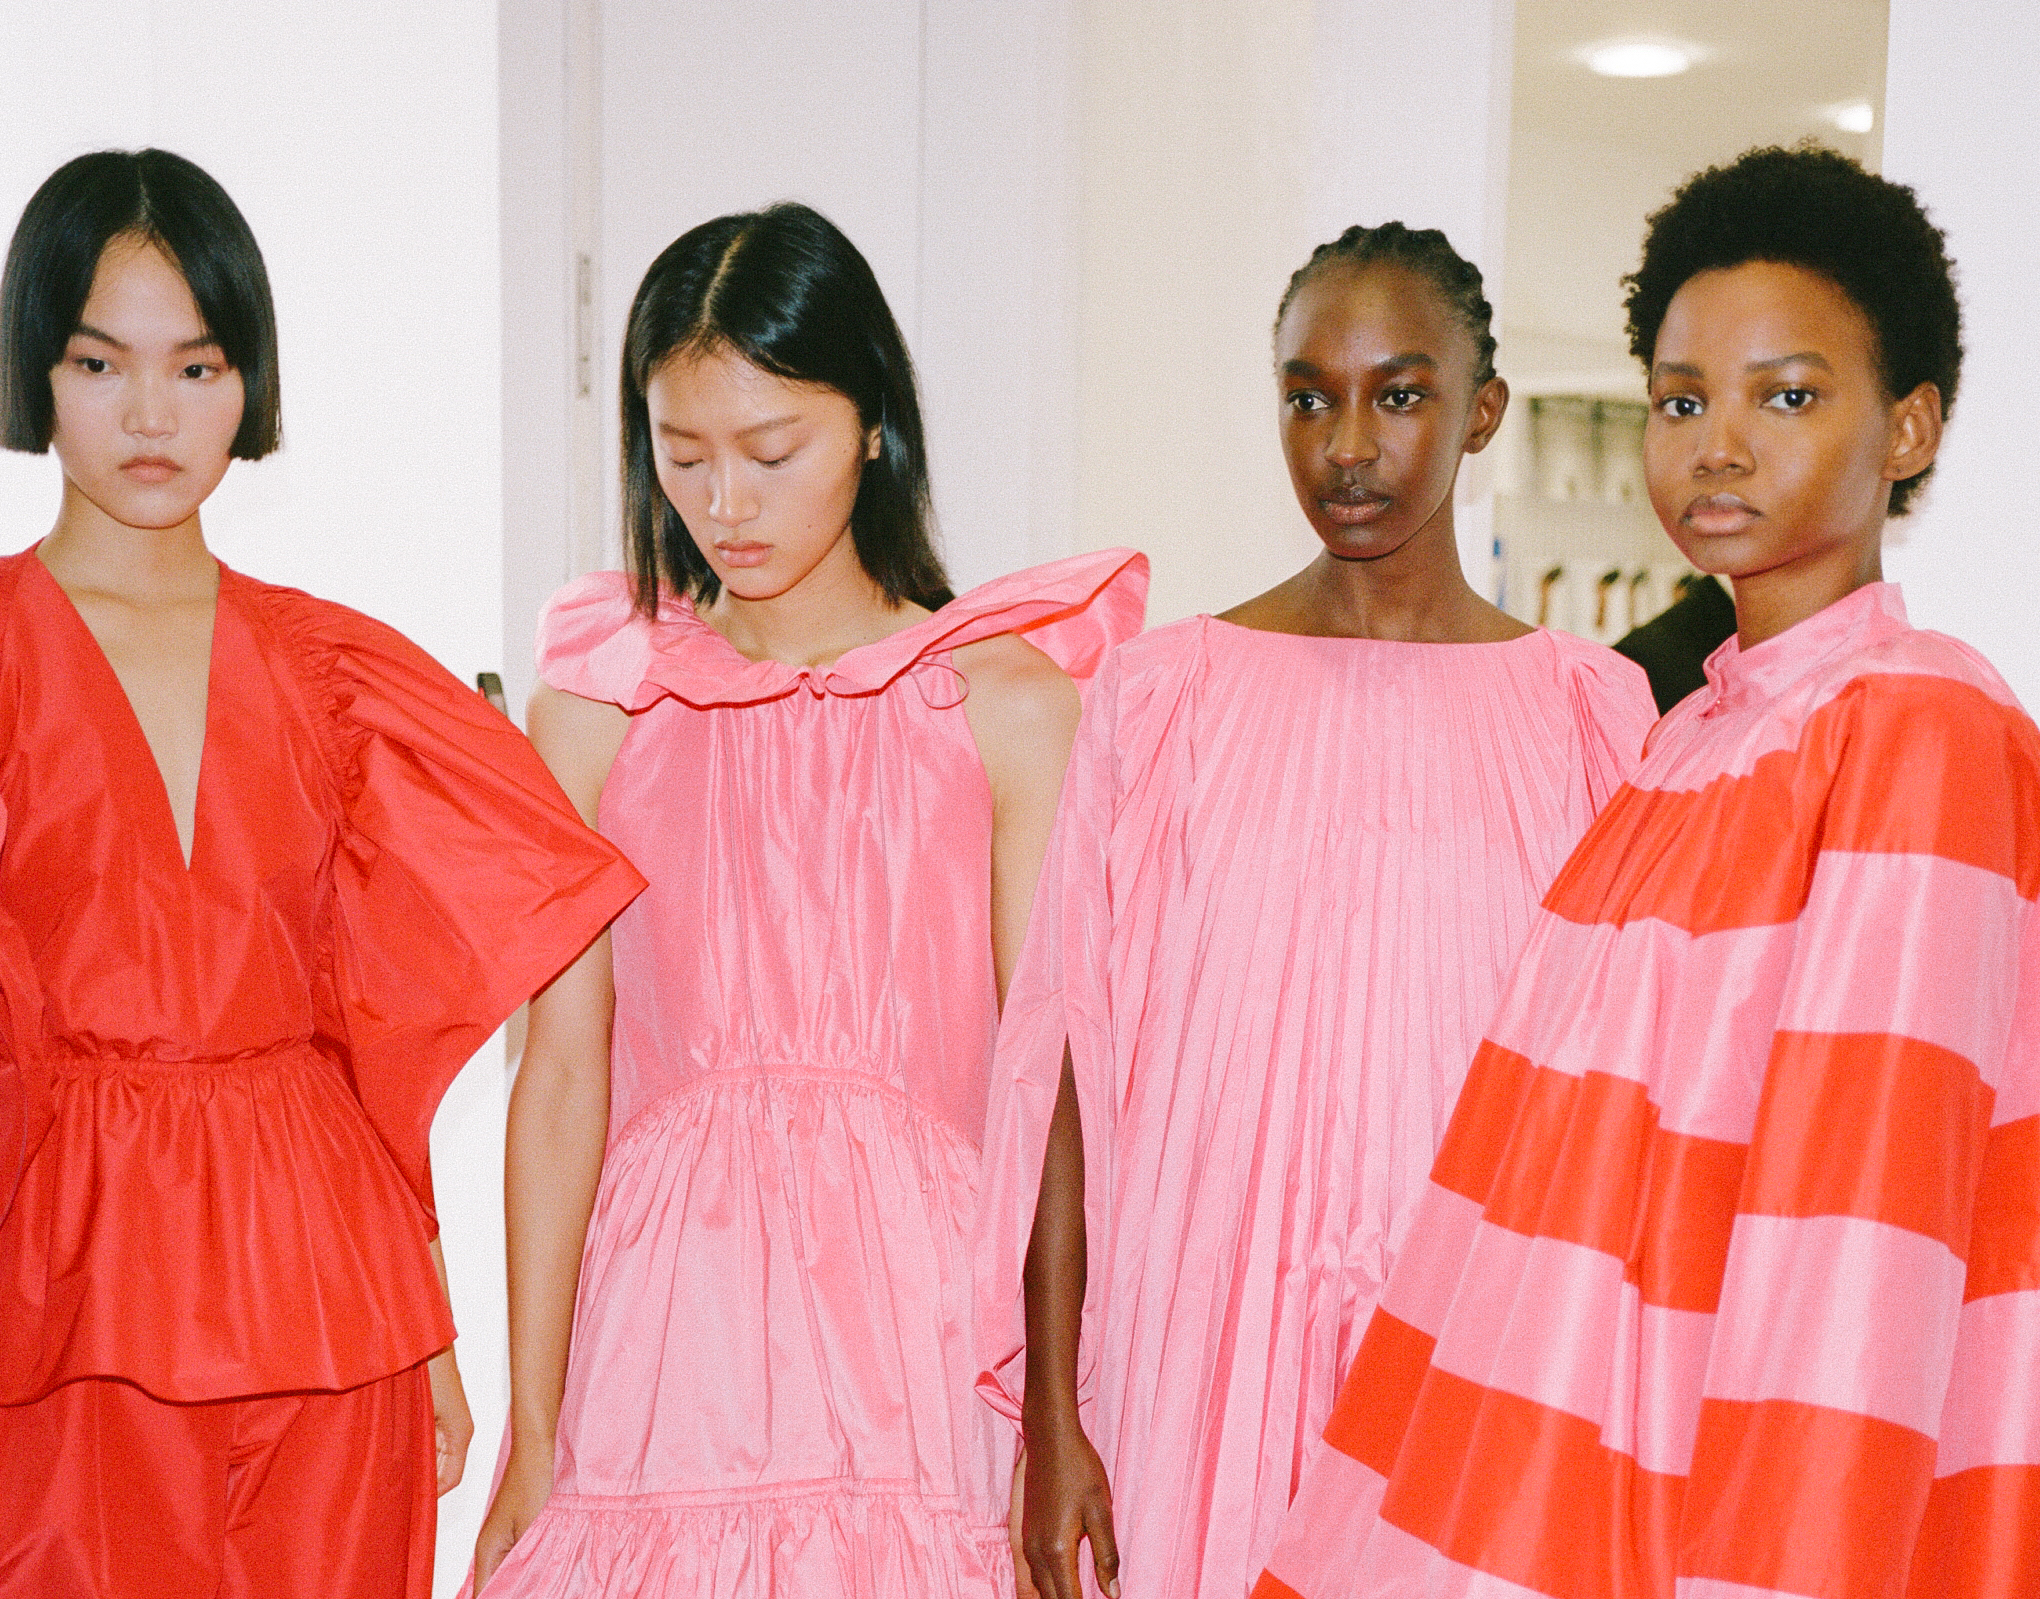 Art and architecture collide for Roksanda Spring/Summer ’20